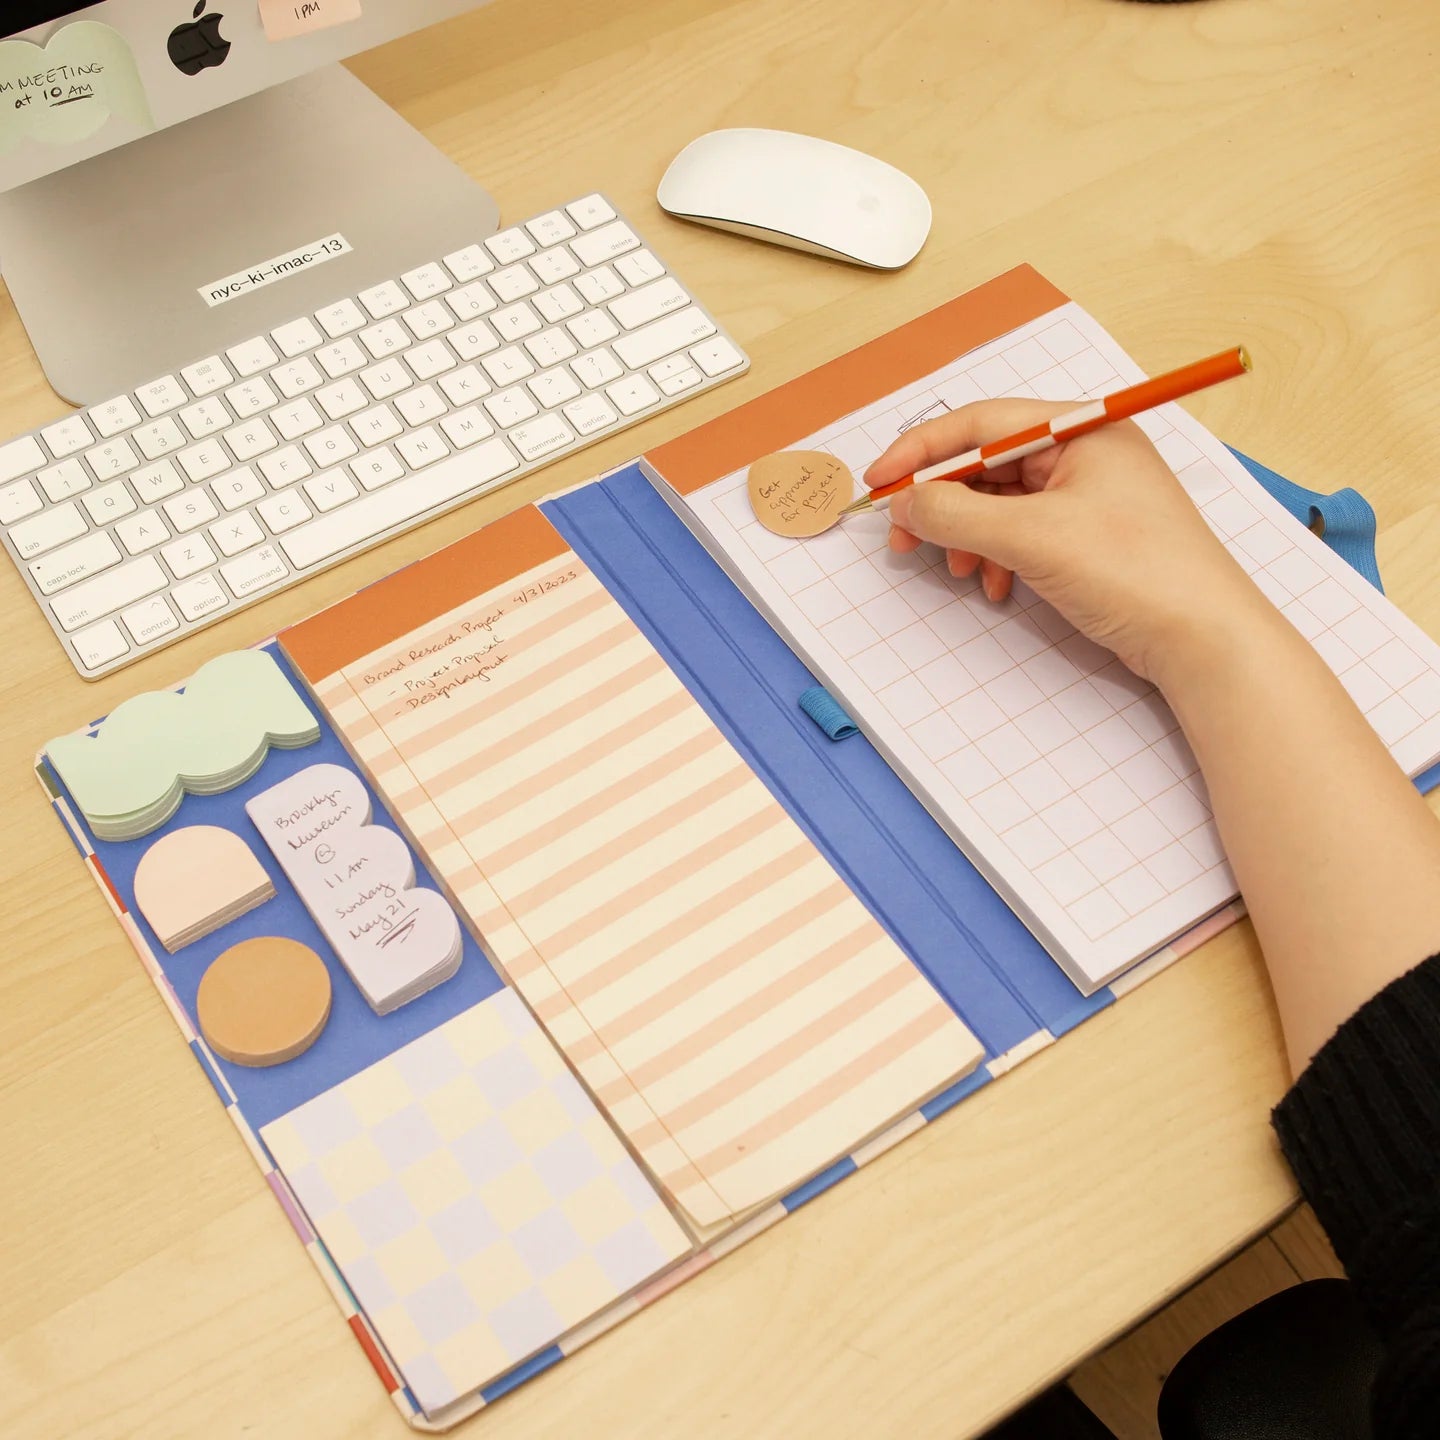 Fab Gifts | Kikkerland Notepad With Sticky Notes Set And Pen by Weirs of Baggot Street